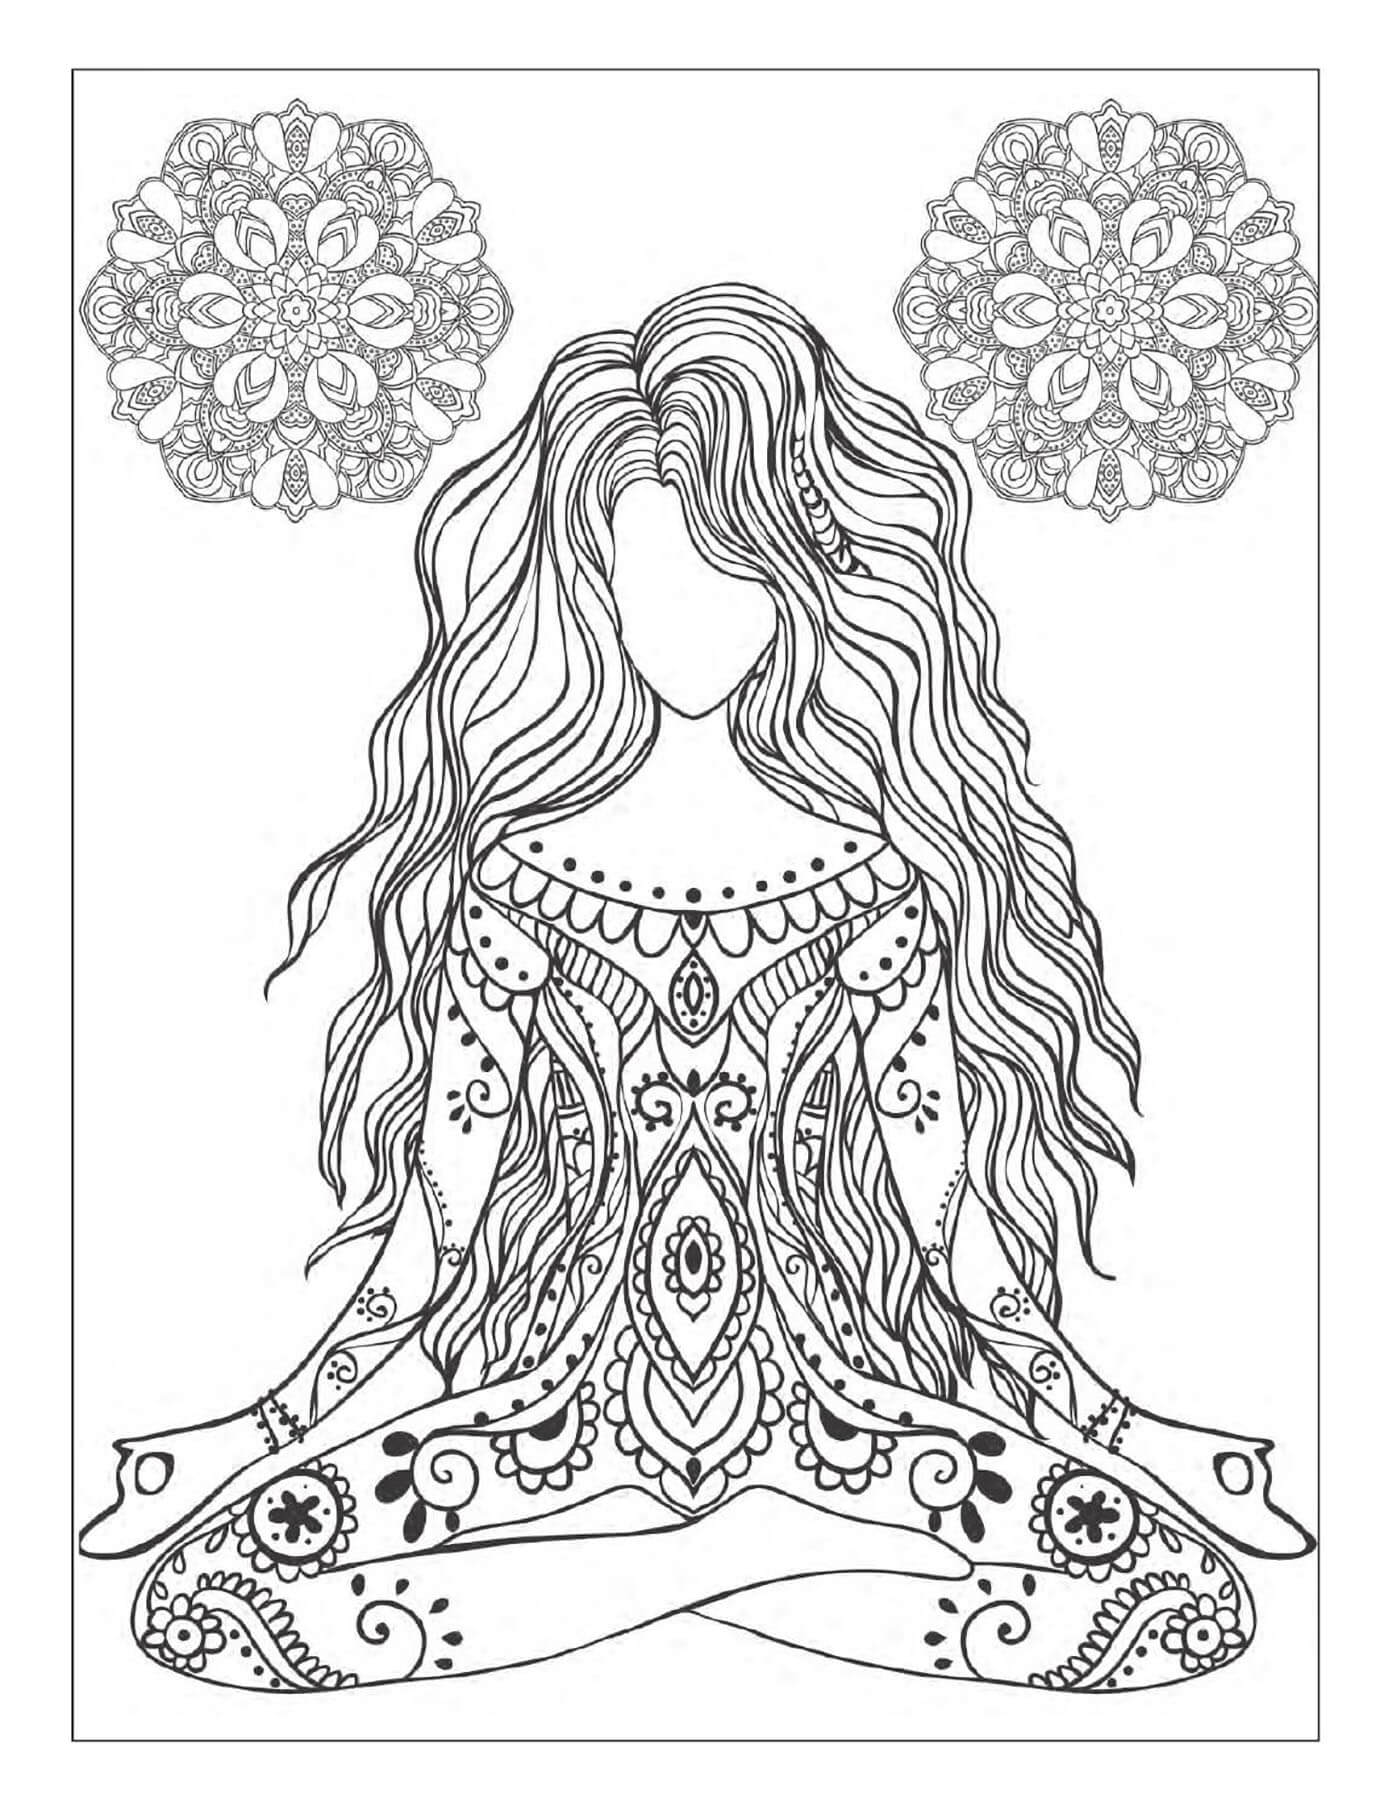 meditation-mindfulness-coloring-page-free-printable-coloring-pages